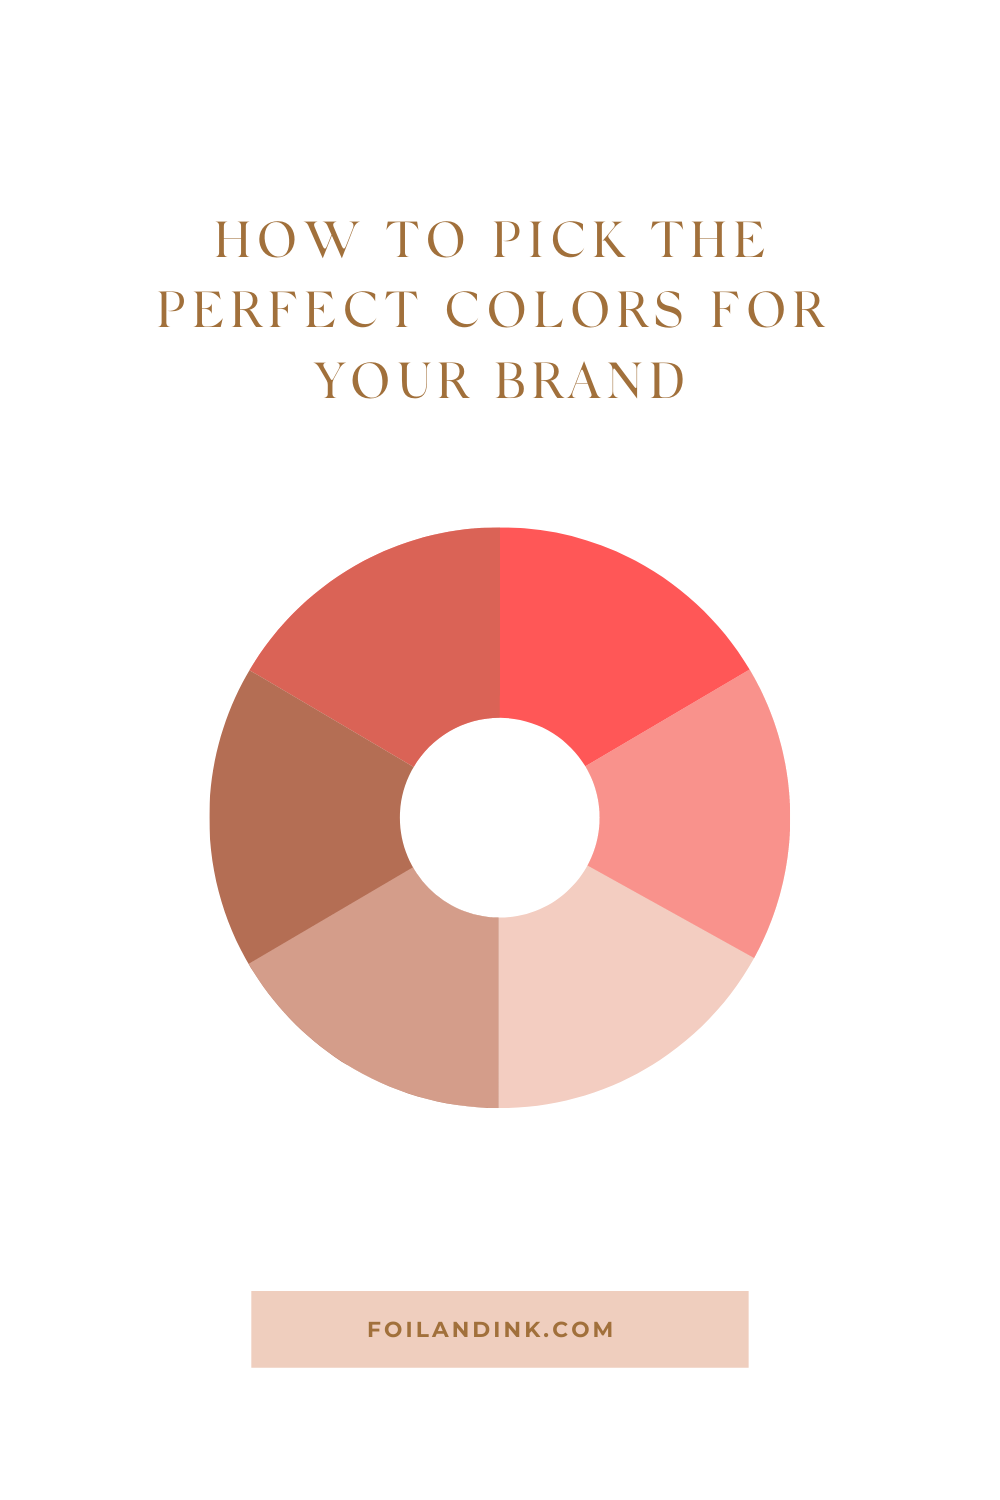 How to choose your brand colors